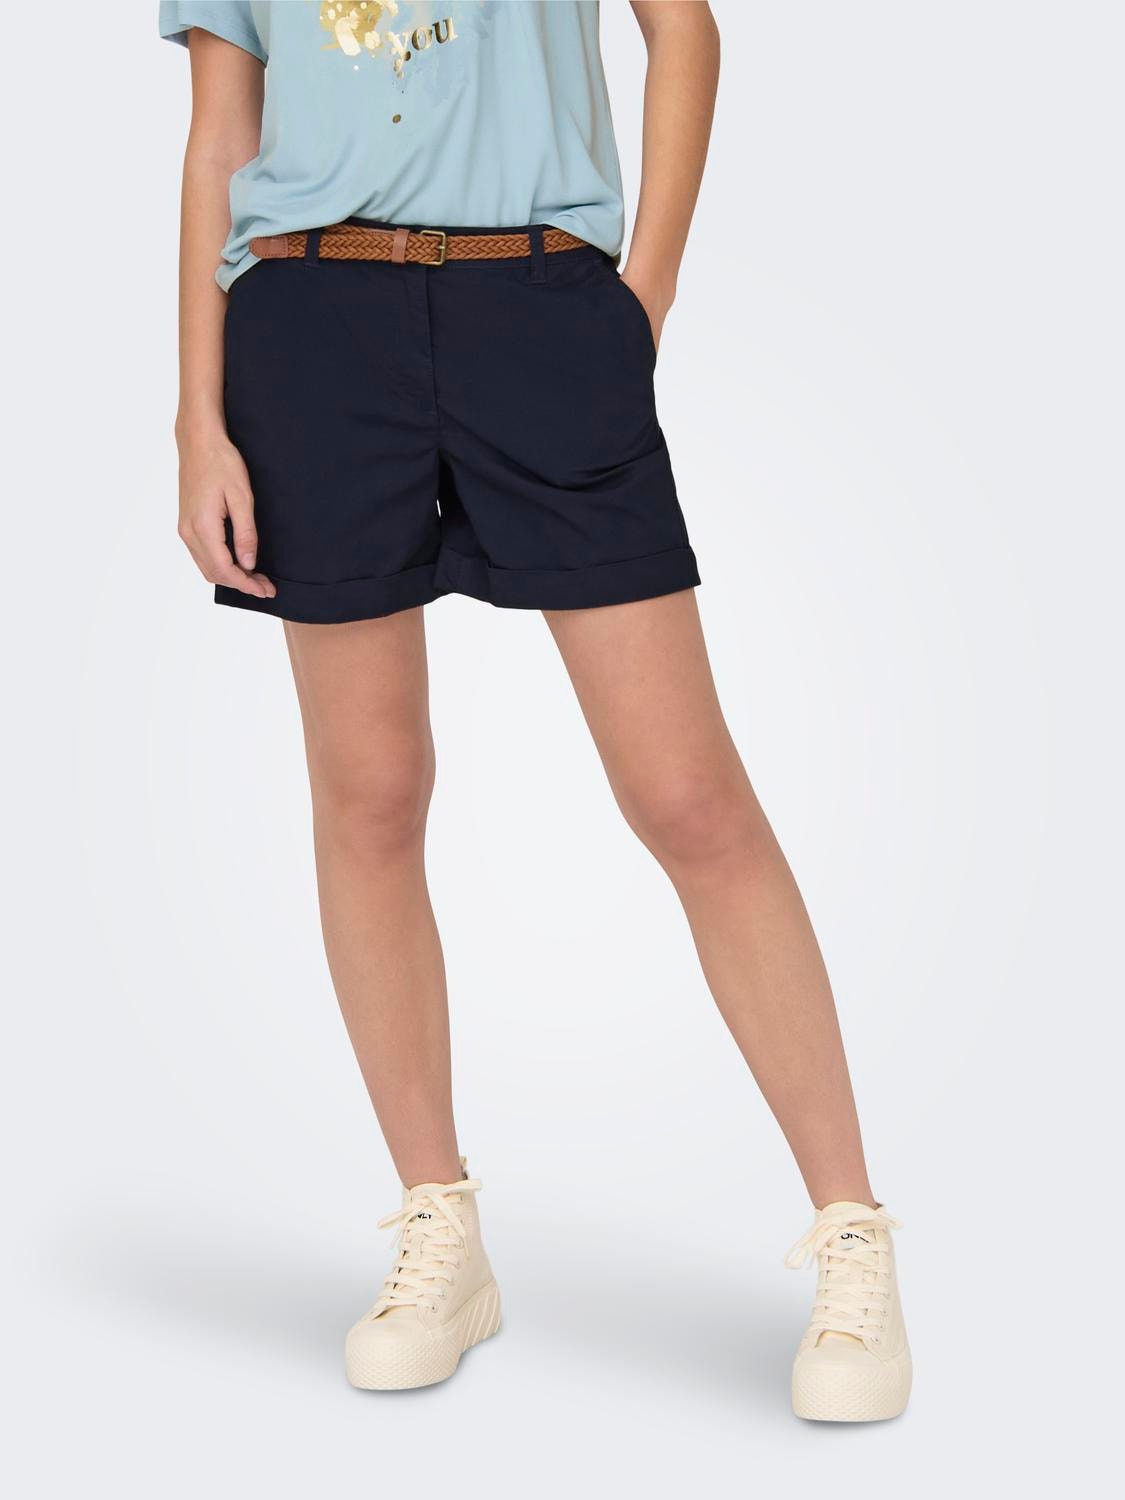 ONLY Shorts Regular Fit Taille moyenne Ourlets repliés -Night Sky - 15324743